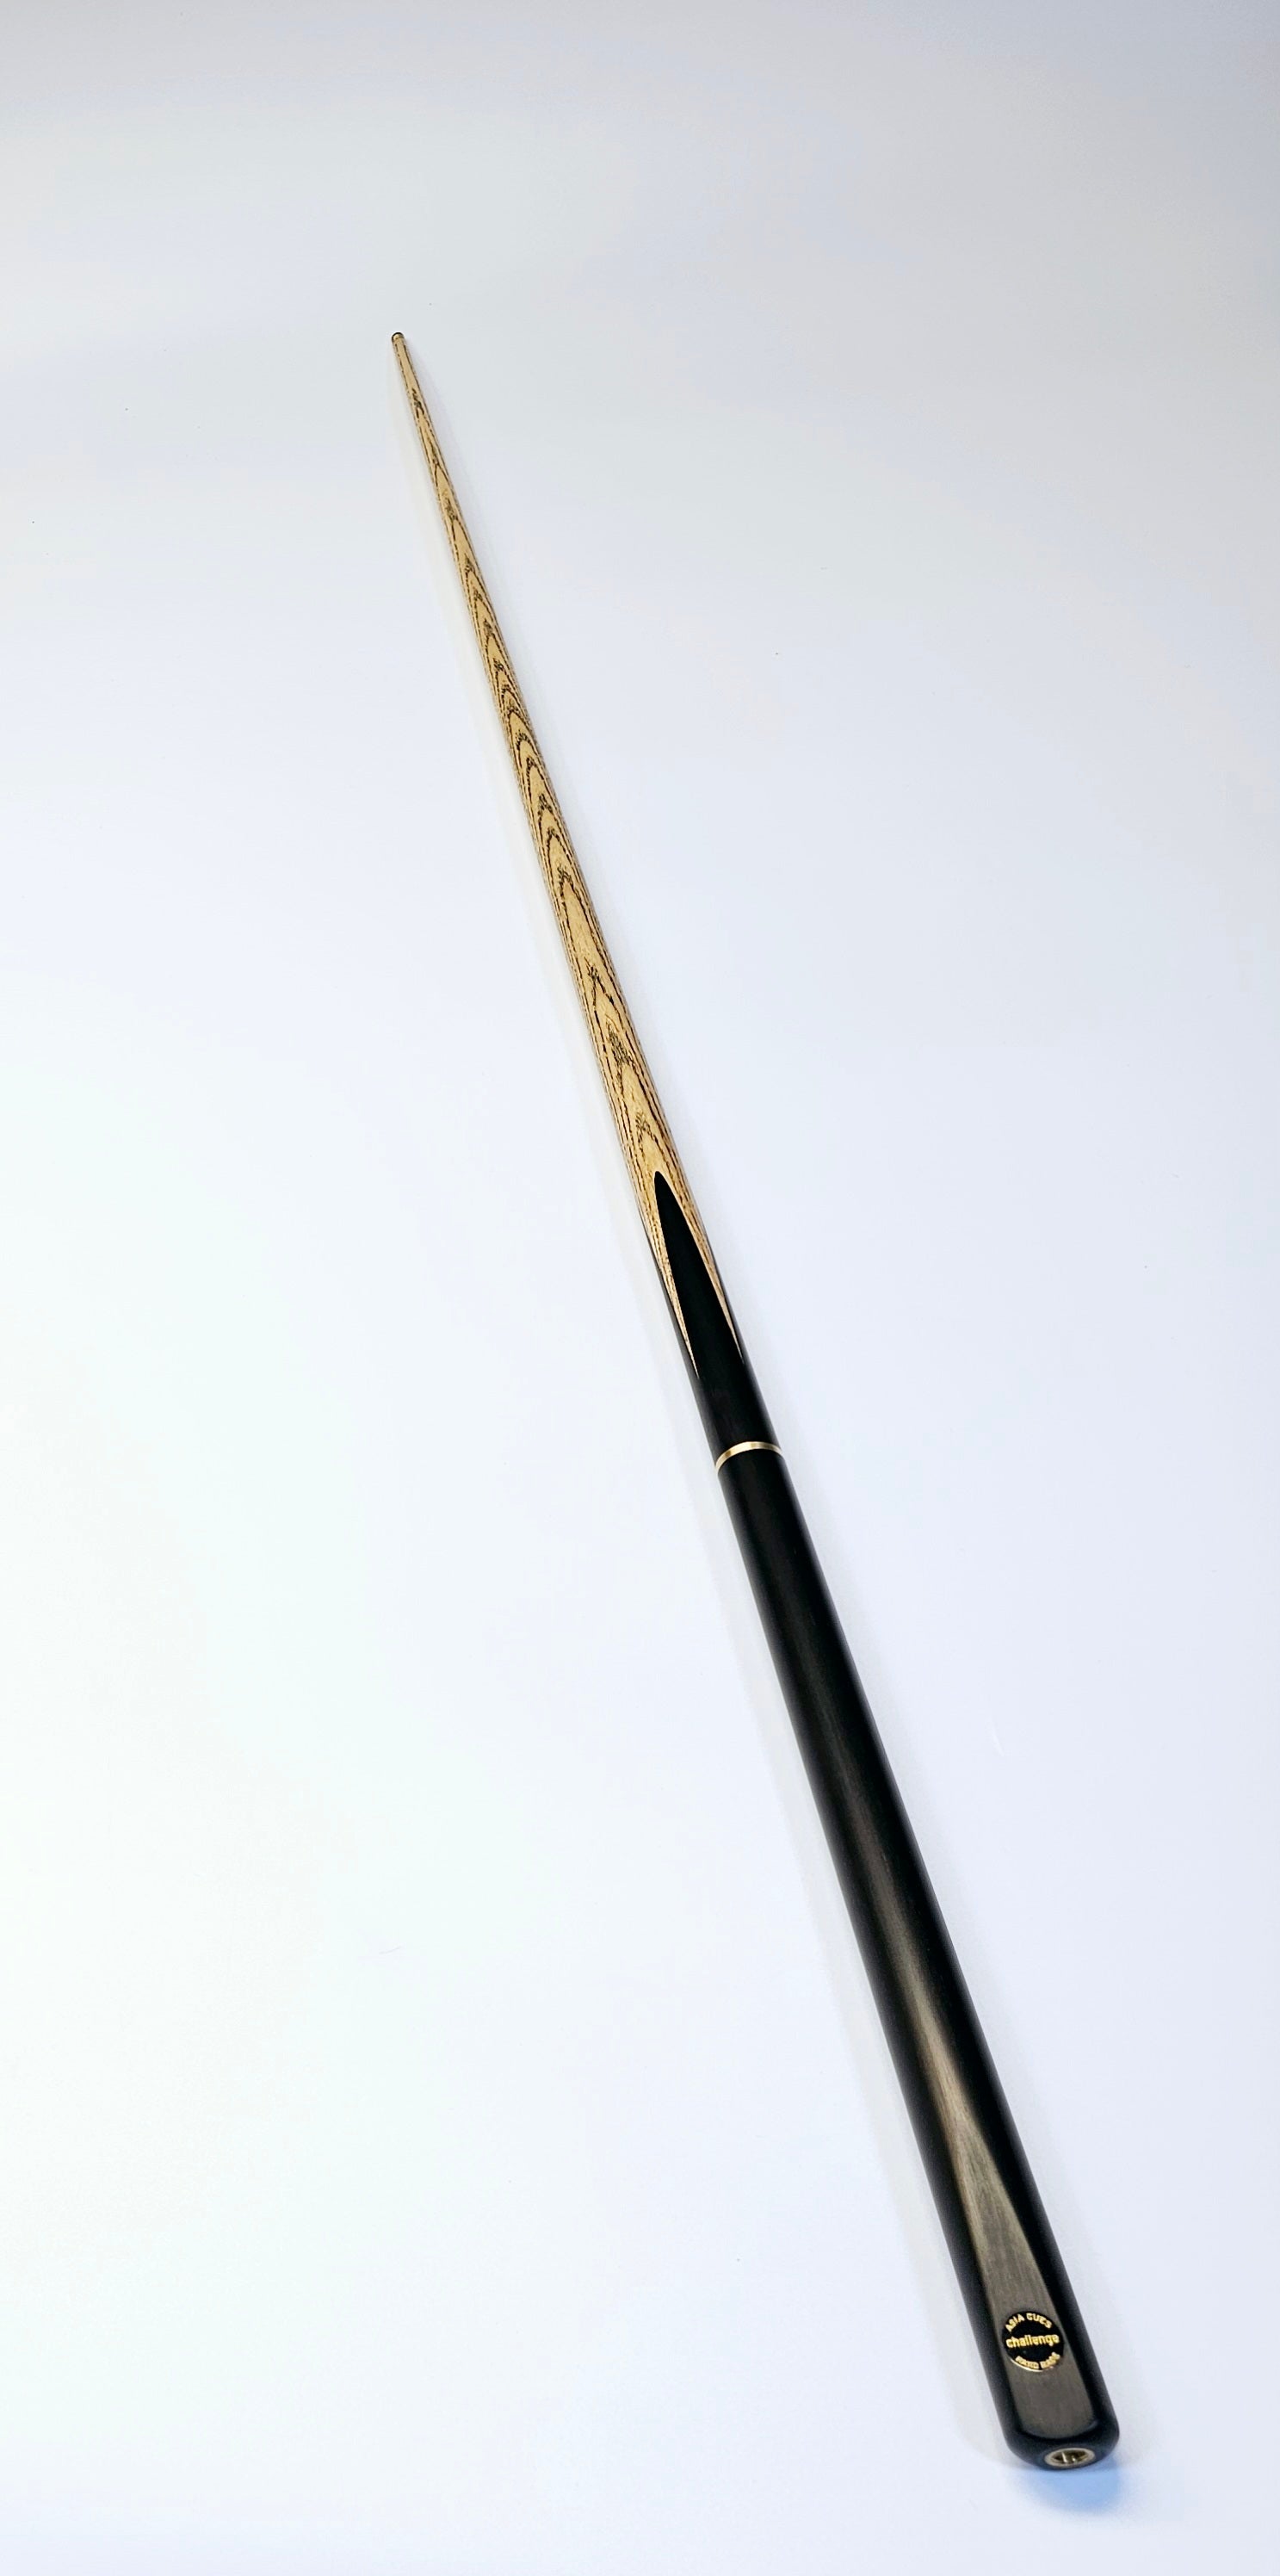 Asia Cues Challenge - 3/4 Jointed Snooker Cue 9.7mm Tip, 17.8oz, 58"